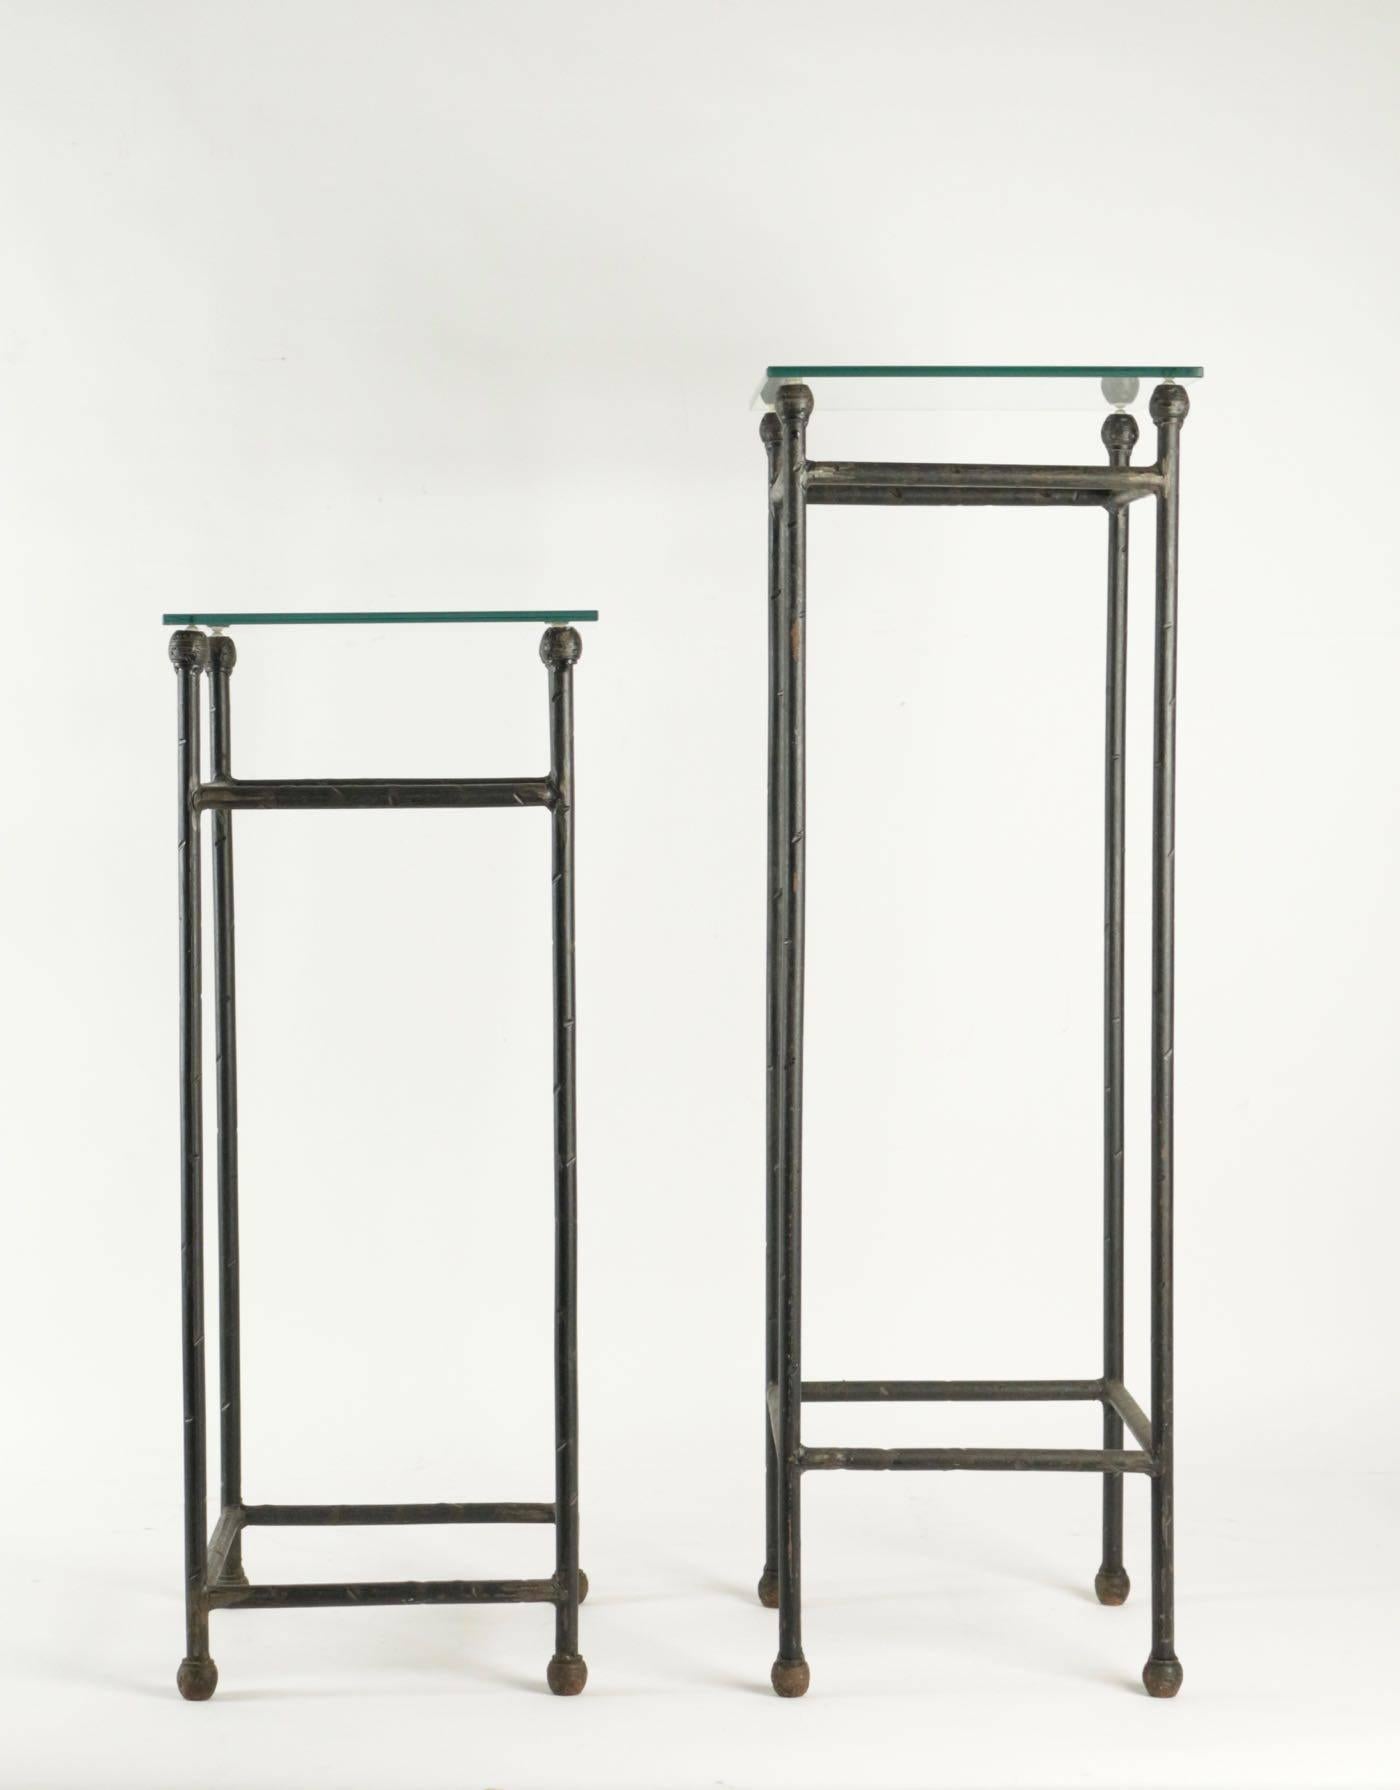 Two consoles in wrought iron under glass in an industrial style 20th century.
Measures: H 93cm, L 30cm, P 30cm
H 76cm, L 30cm, P 30cm.